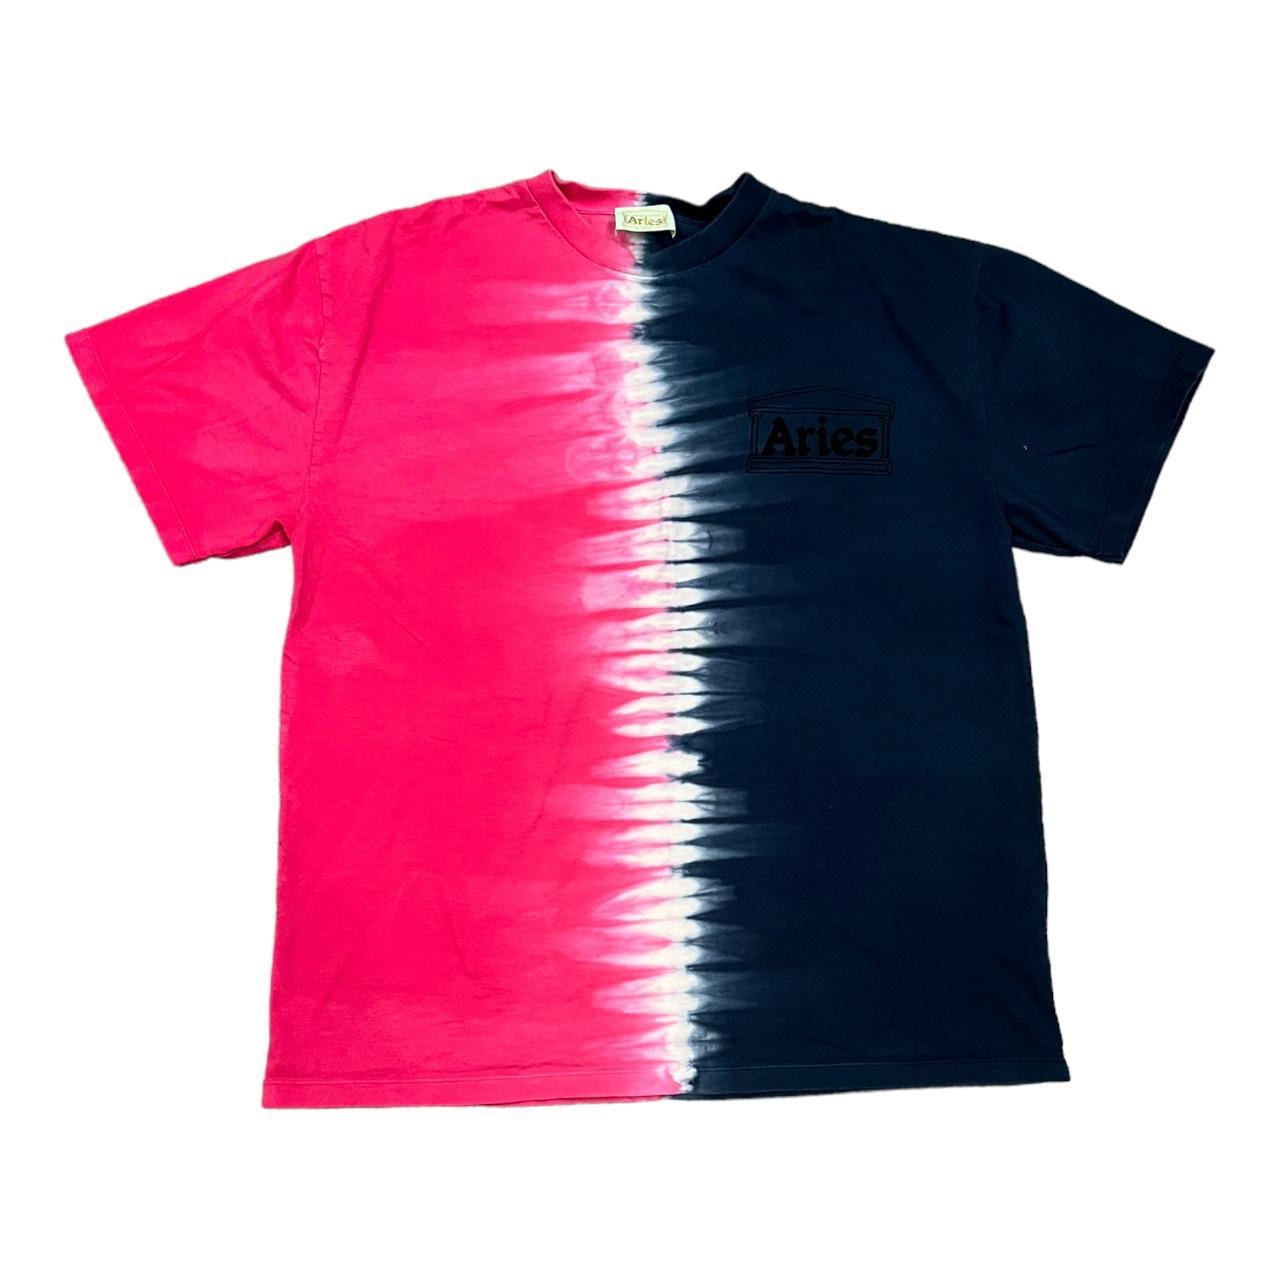 Aries Men's Navy and Pink T-shirt